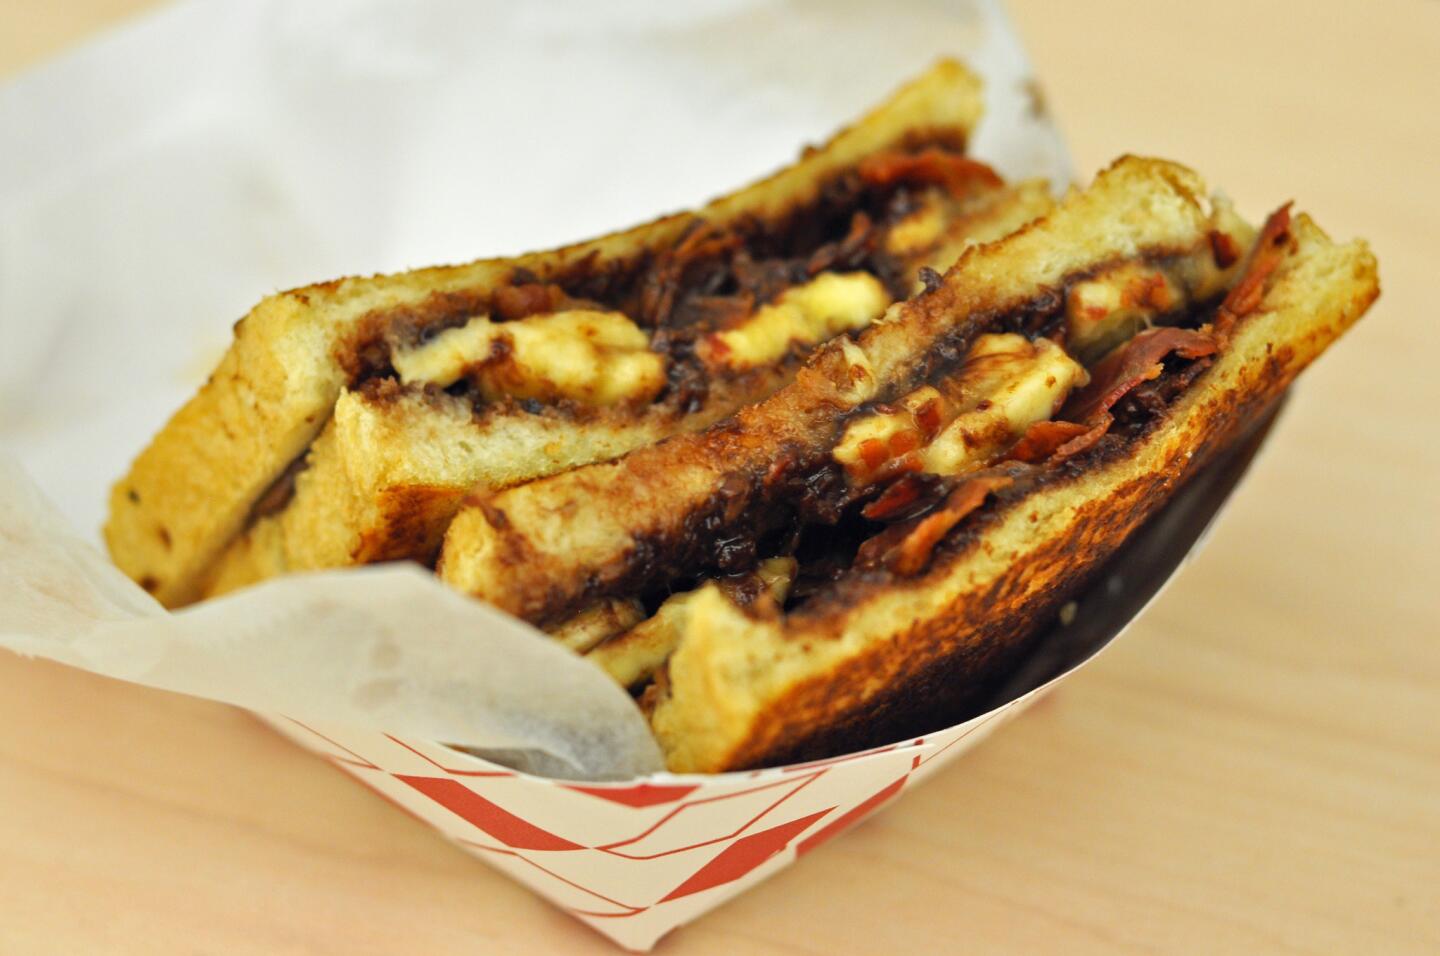 The Bacon Explosion Melt made with Nutella, bacon, bananas and honey.